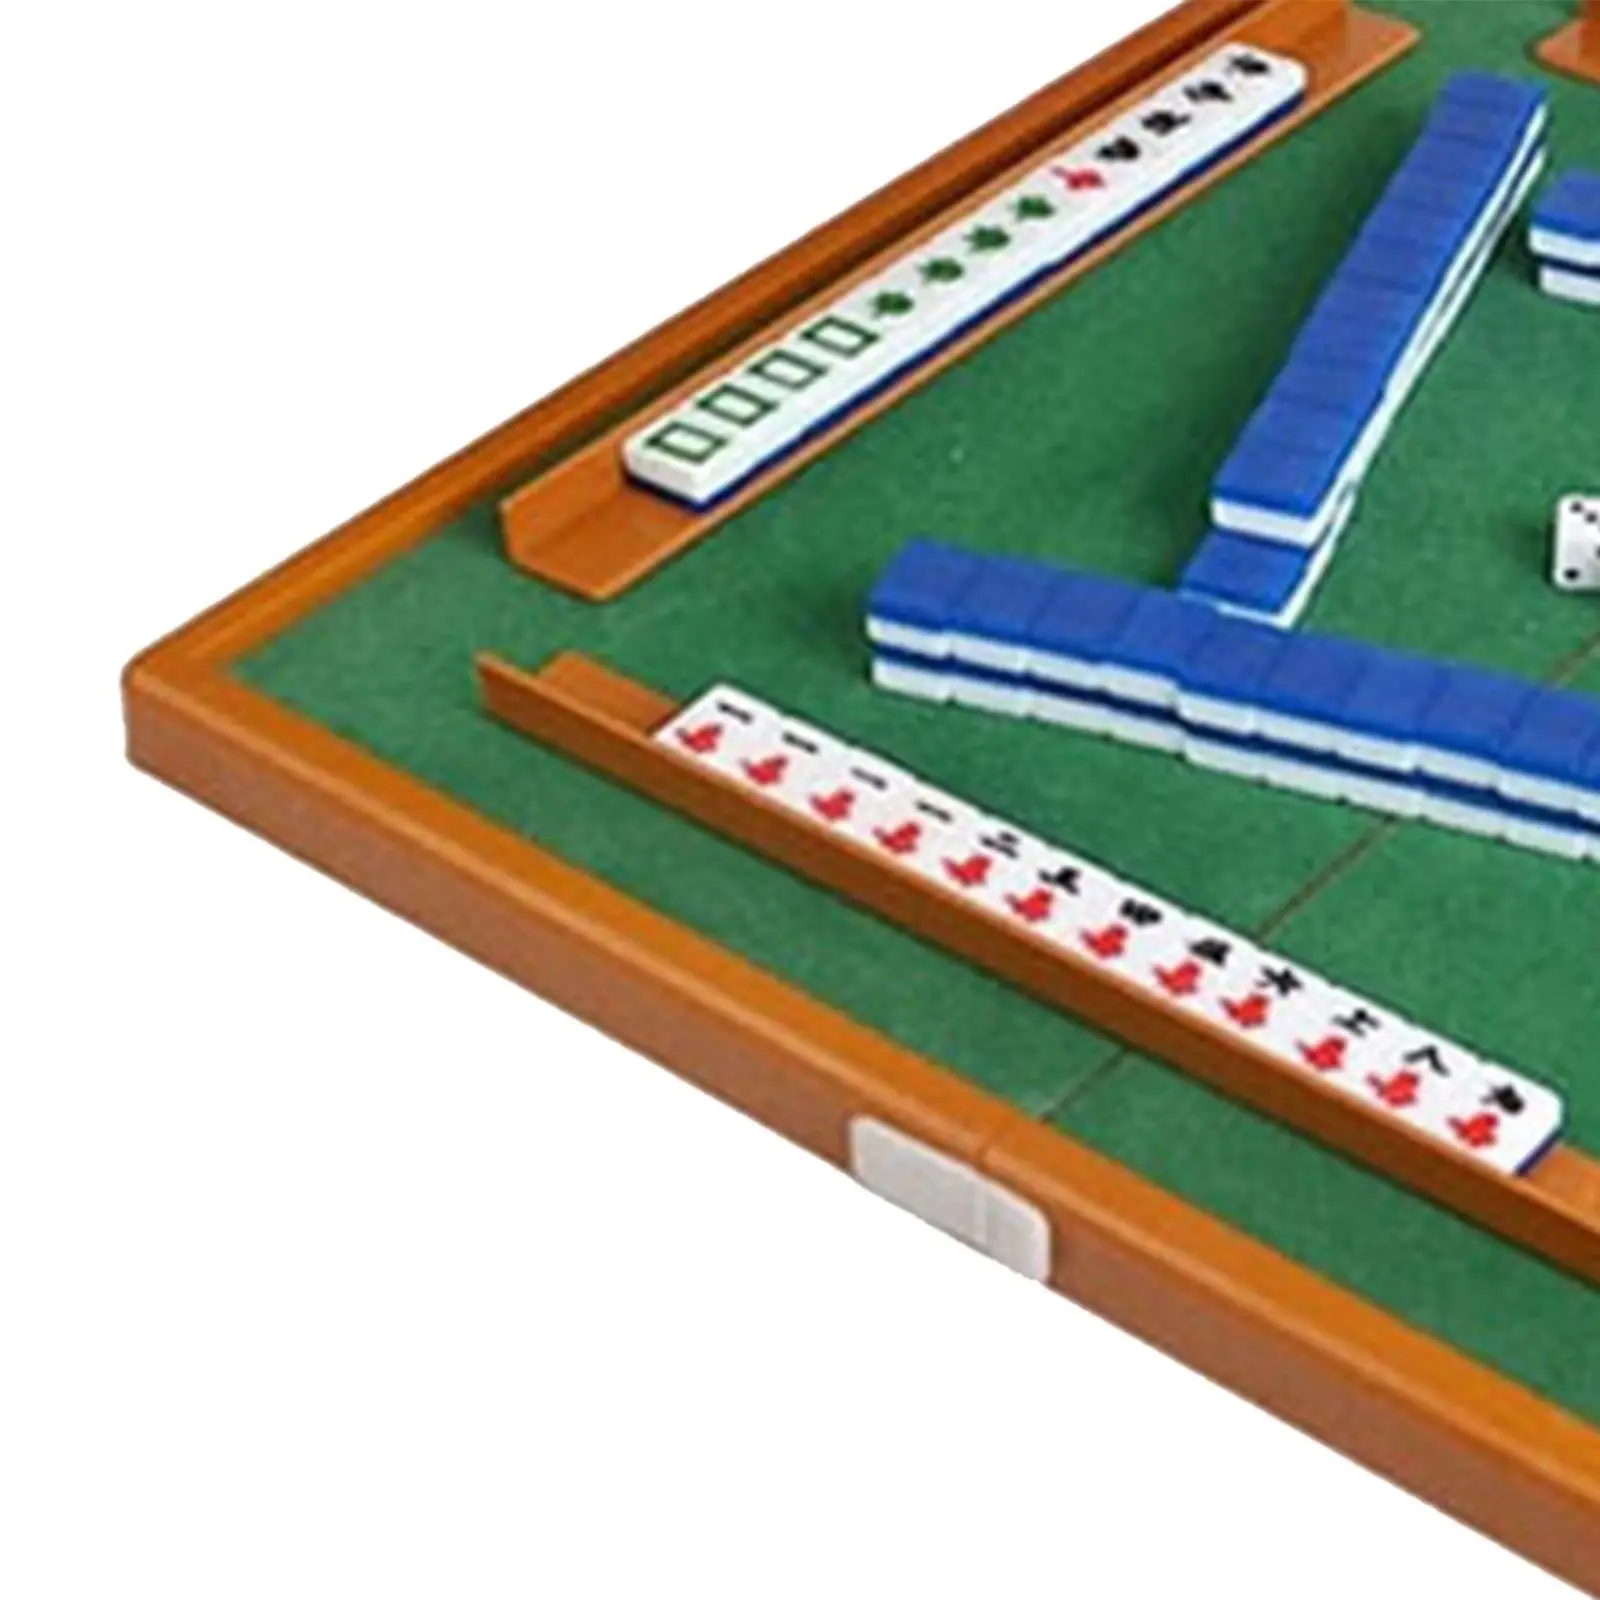 Portable Mini Mahjong Set Indoor Entertainment Accessories with Foldable Table Tile Game Activity Game for Home Party